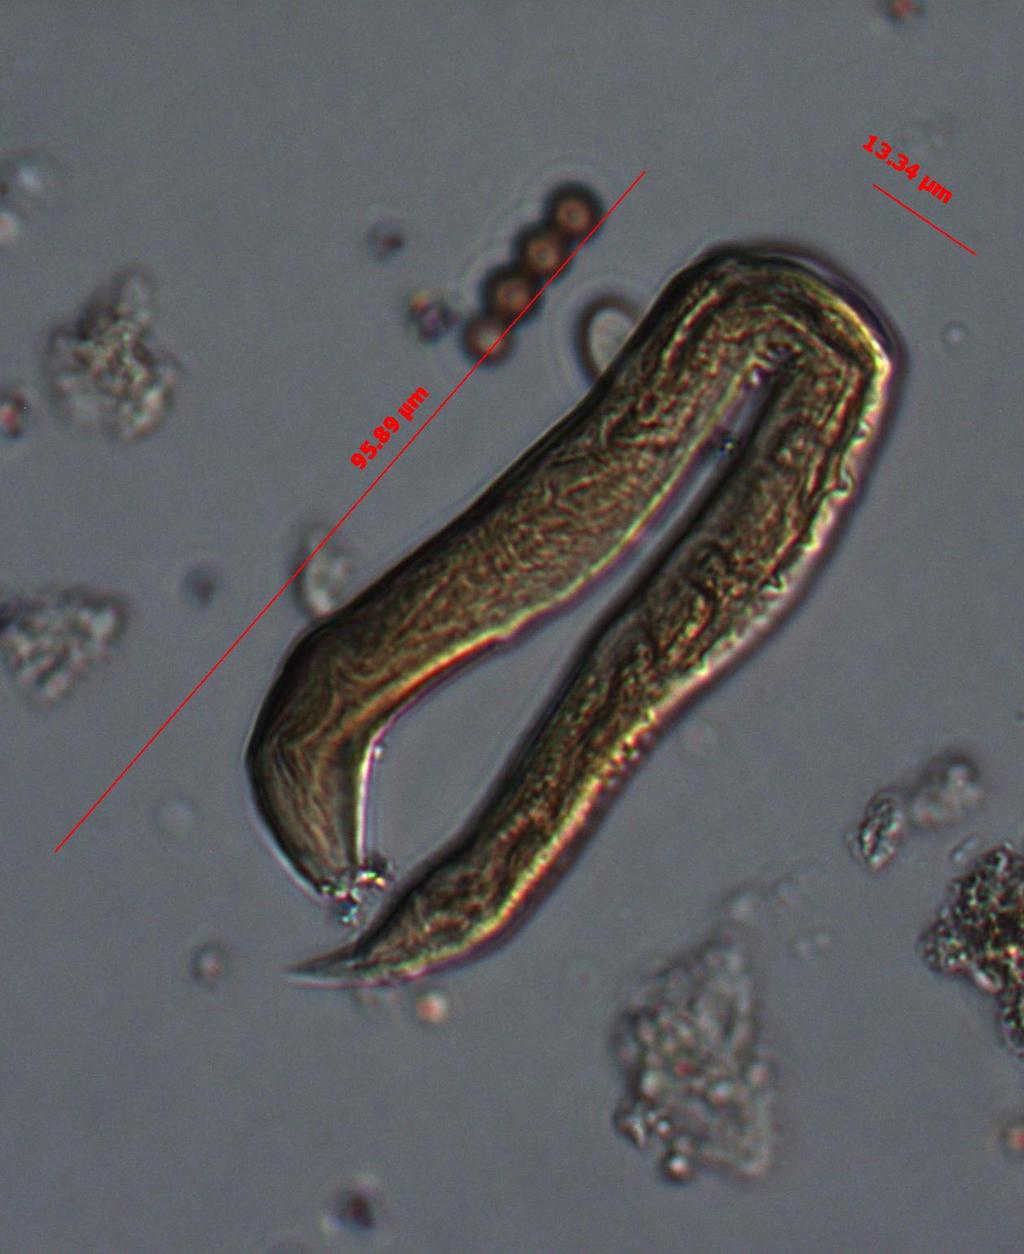 Figure 7. Filariform larva from Pueblo Bonito. This larva resembles the infective stage (L3) of A.